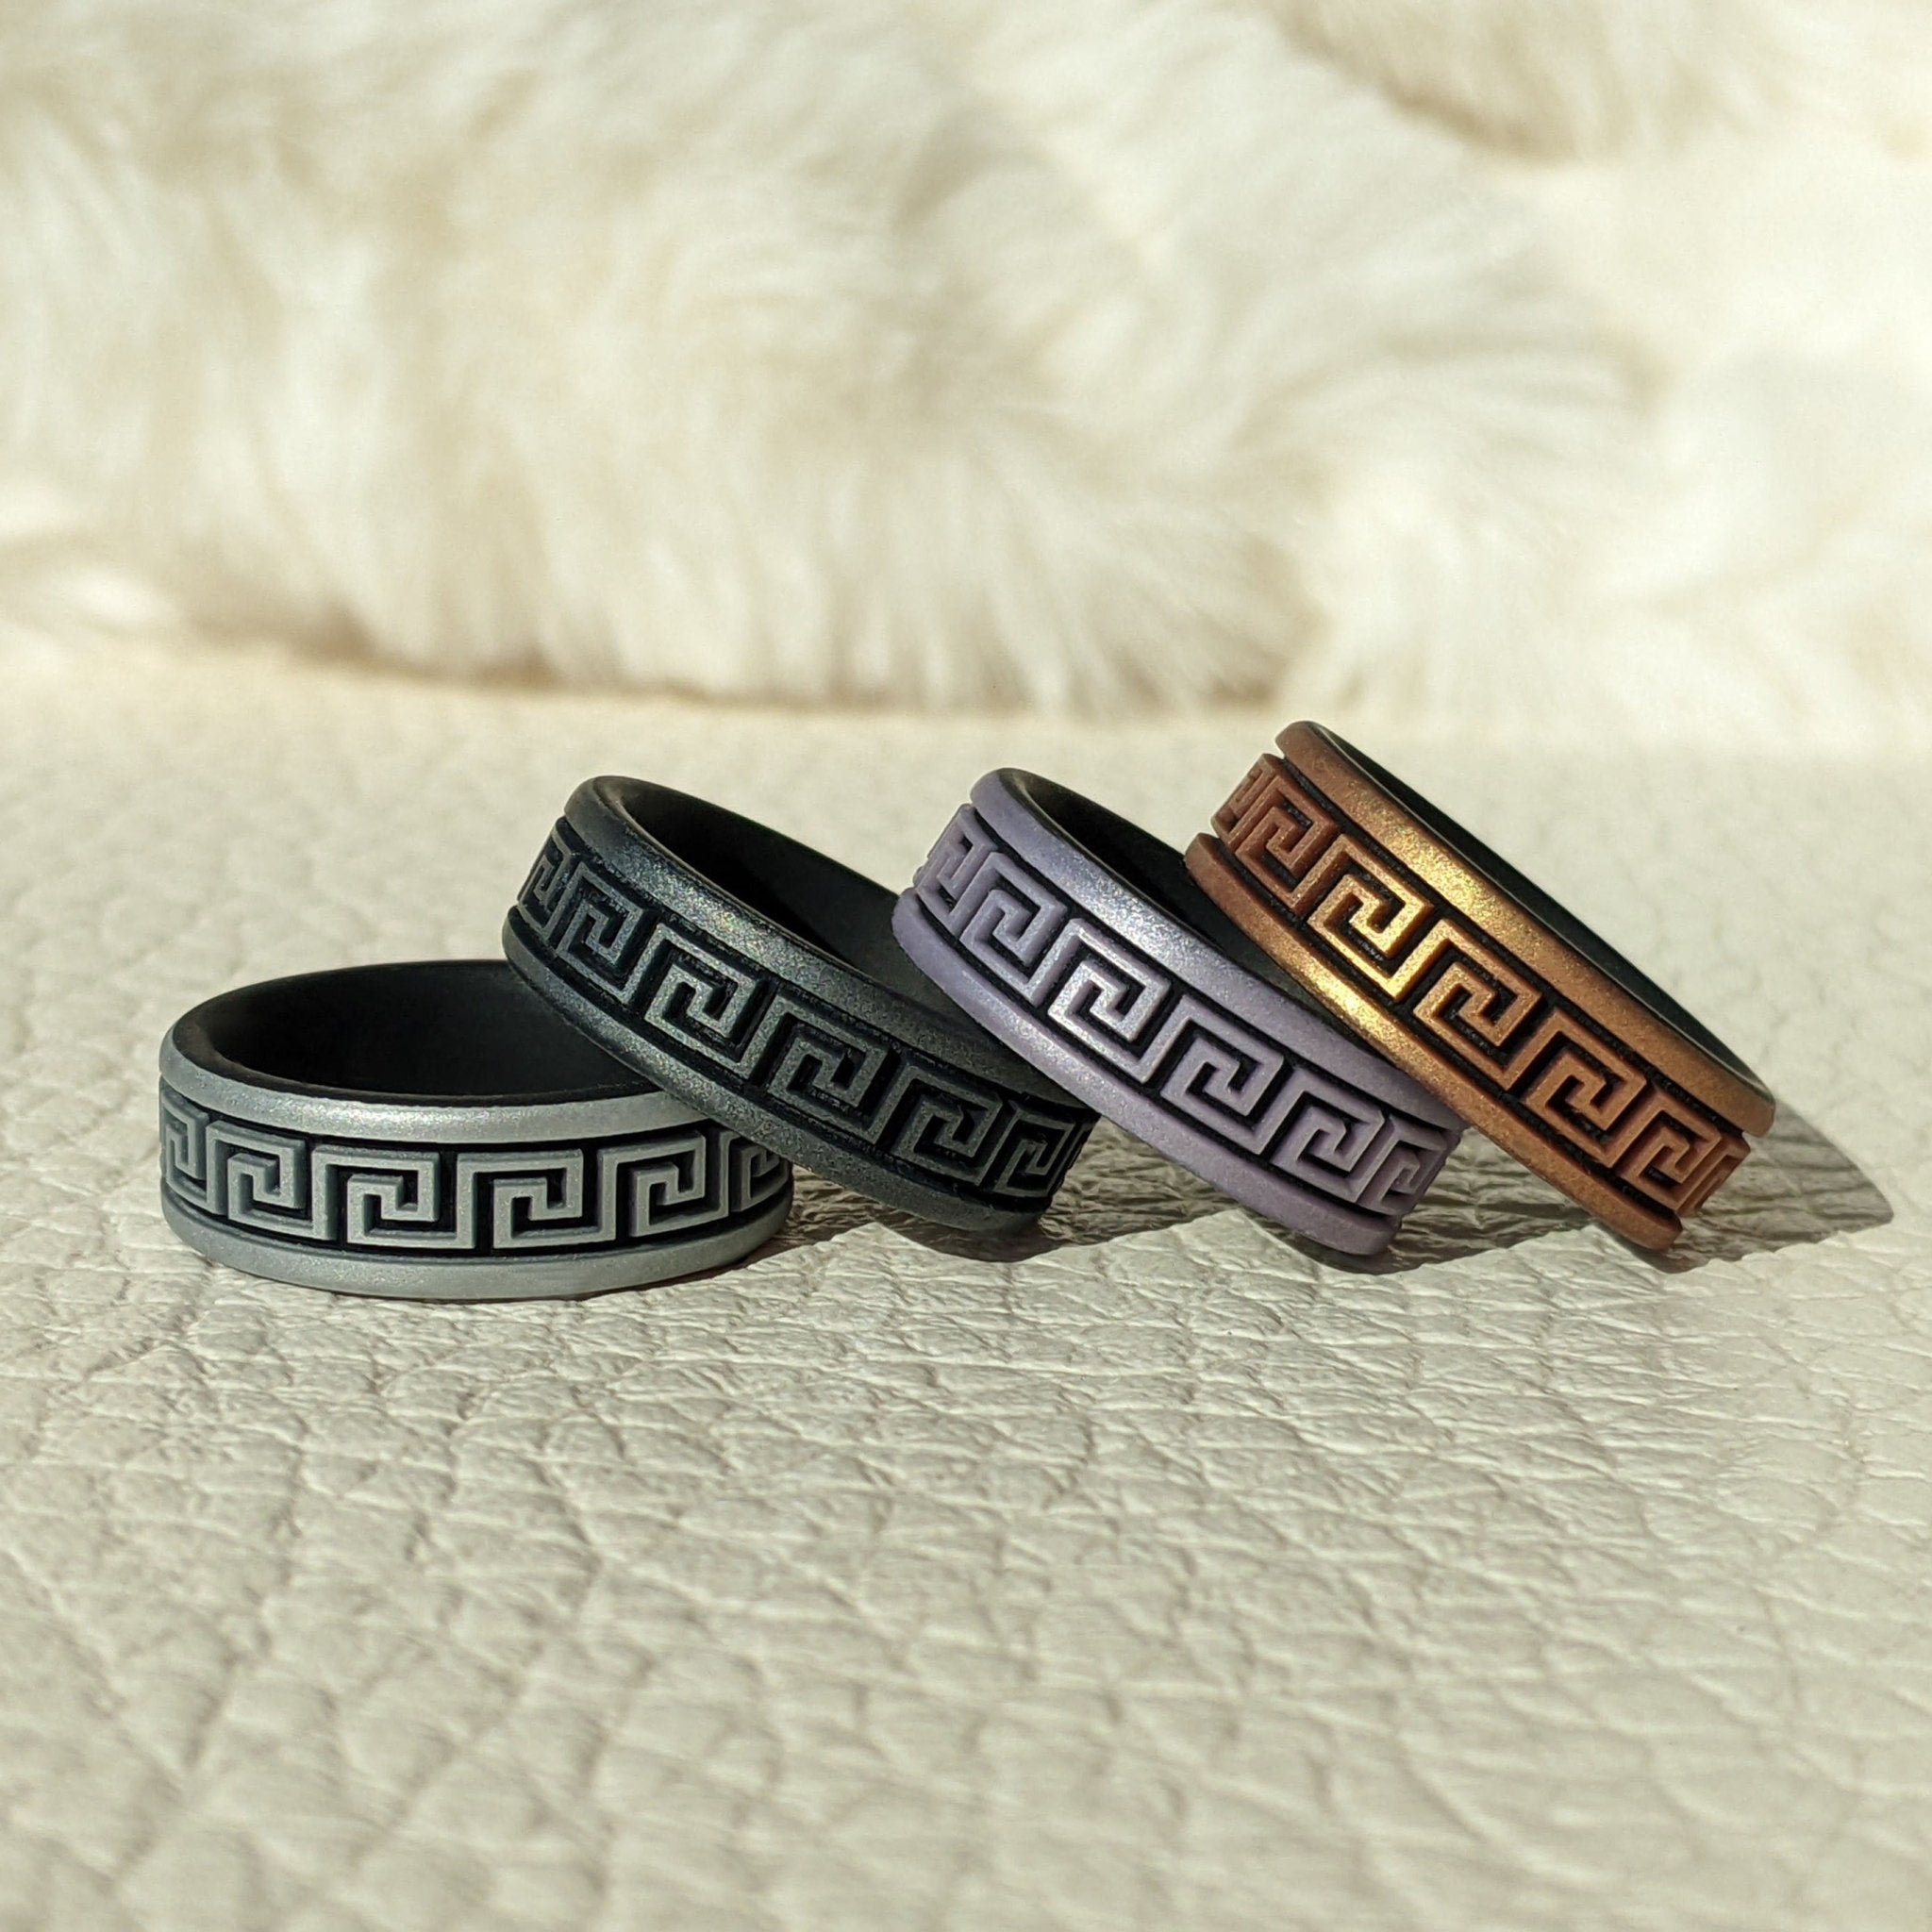 Greek Key Silicone Wedding Ring - Engraved Dual Layer - Knot Theory